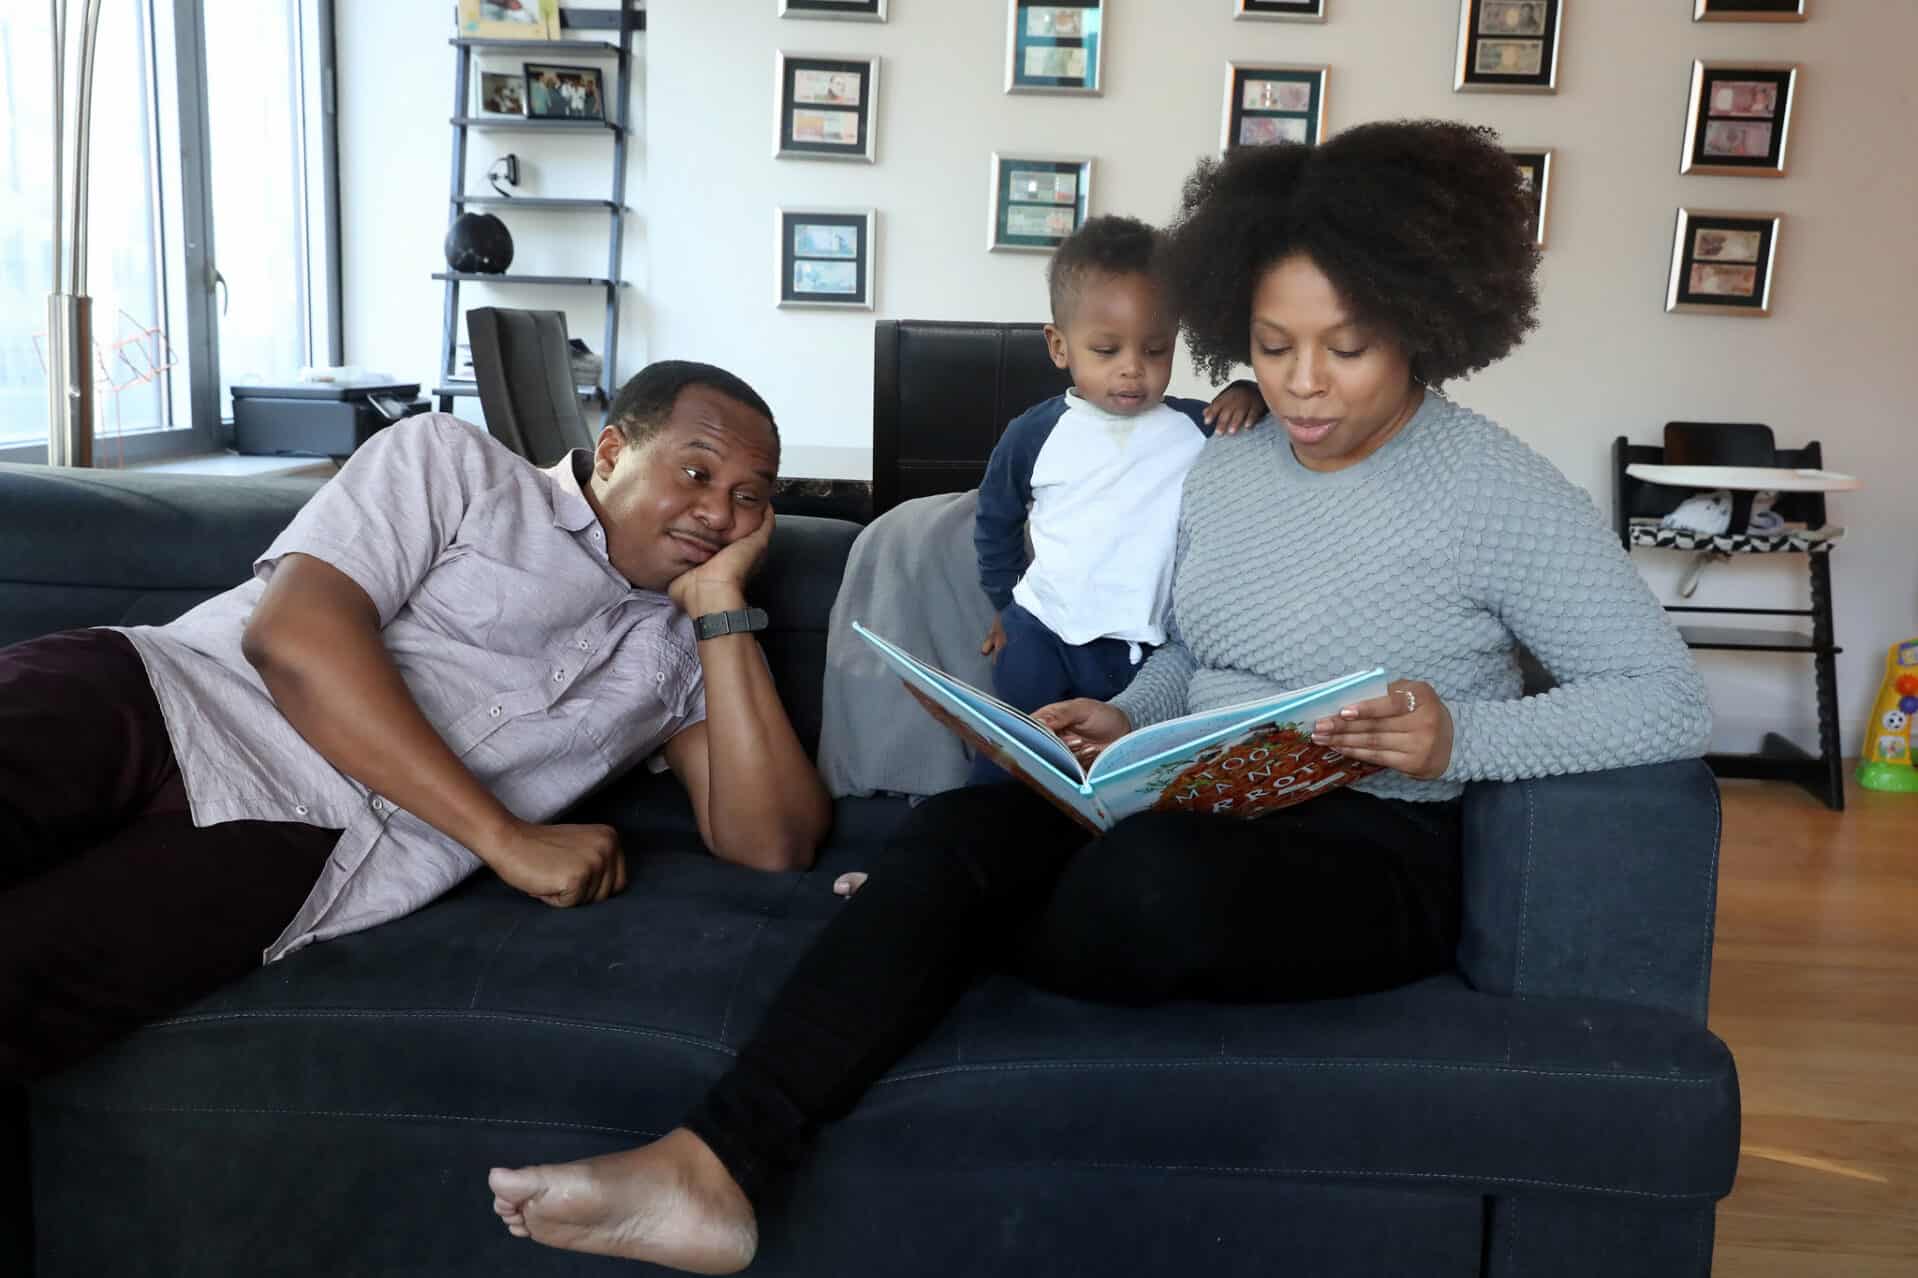 Roy Wood Jr. and his family during Sundays